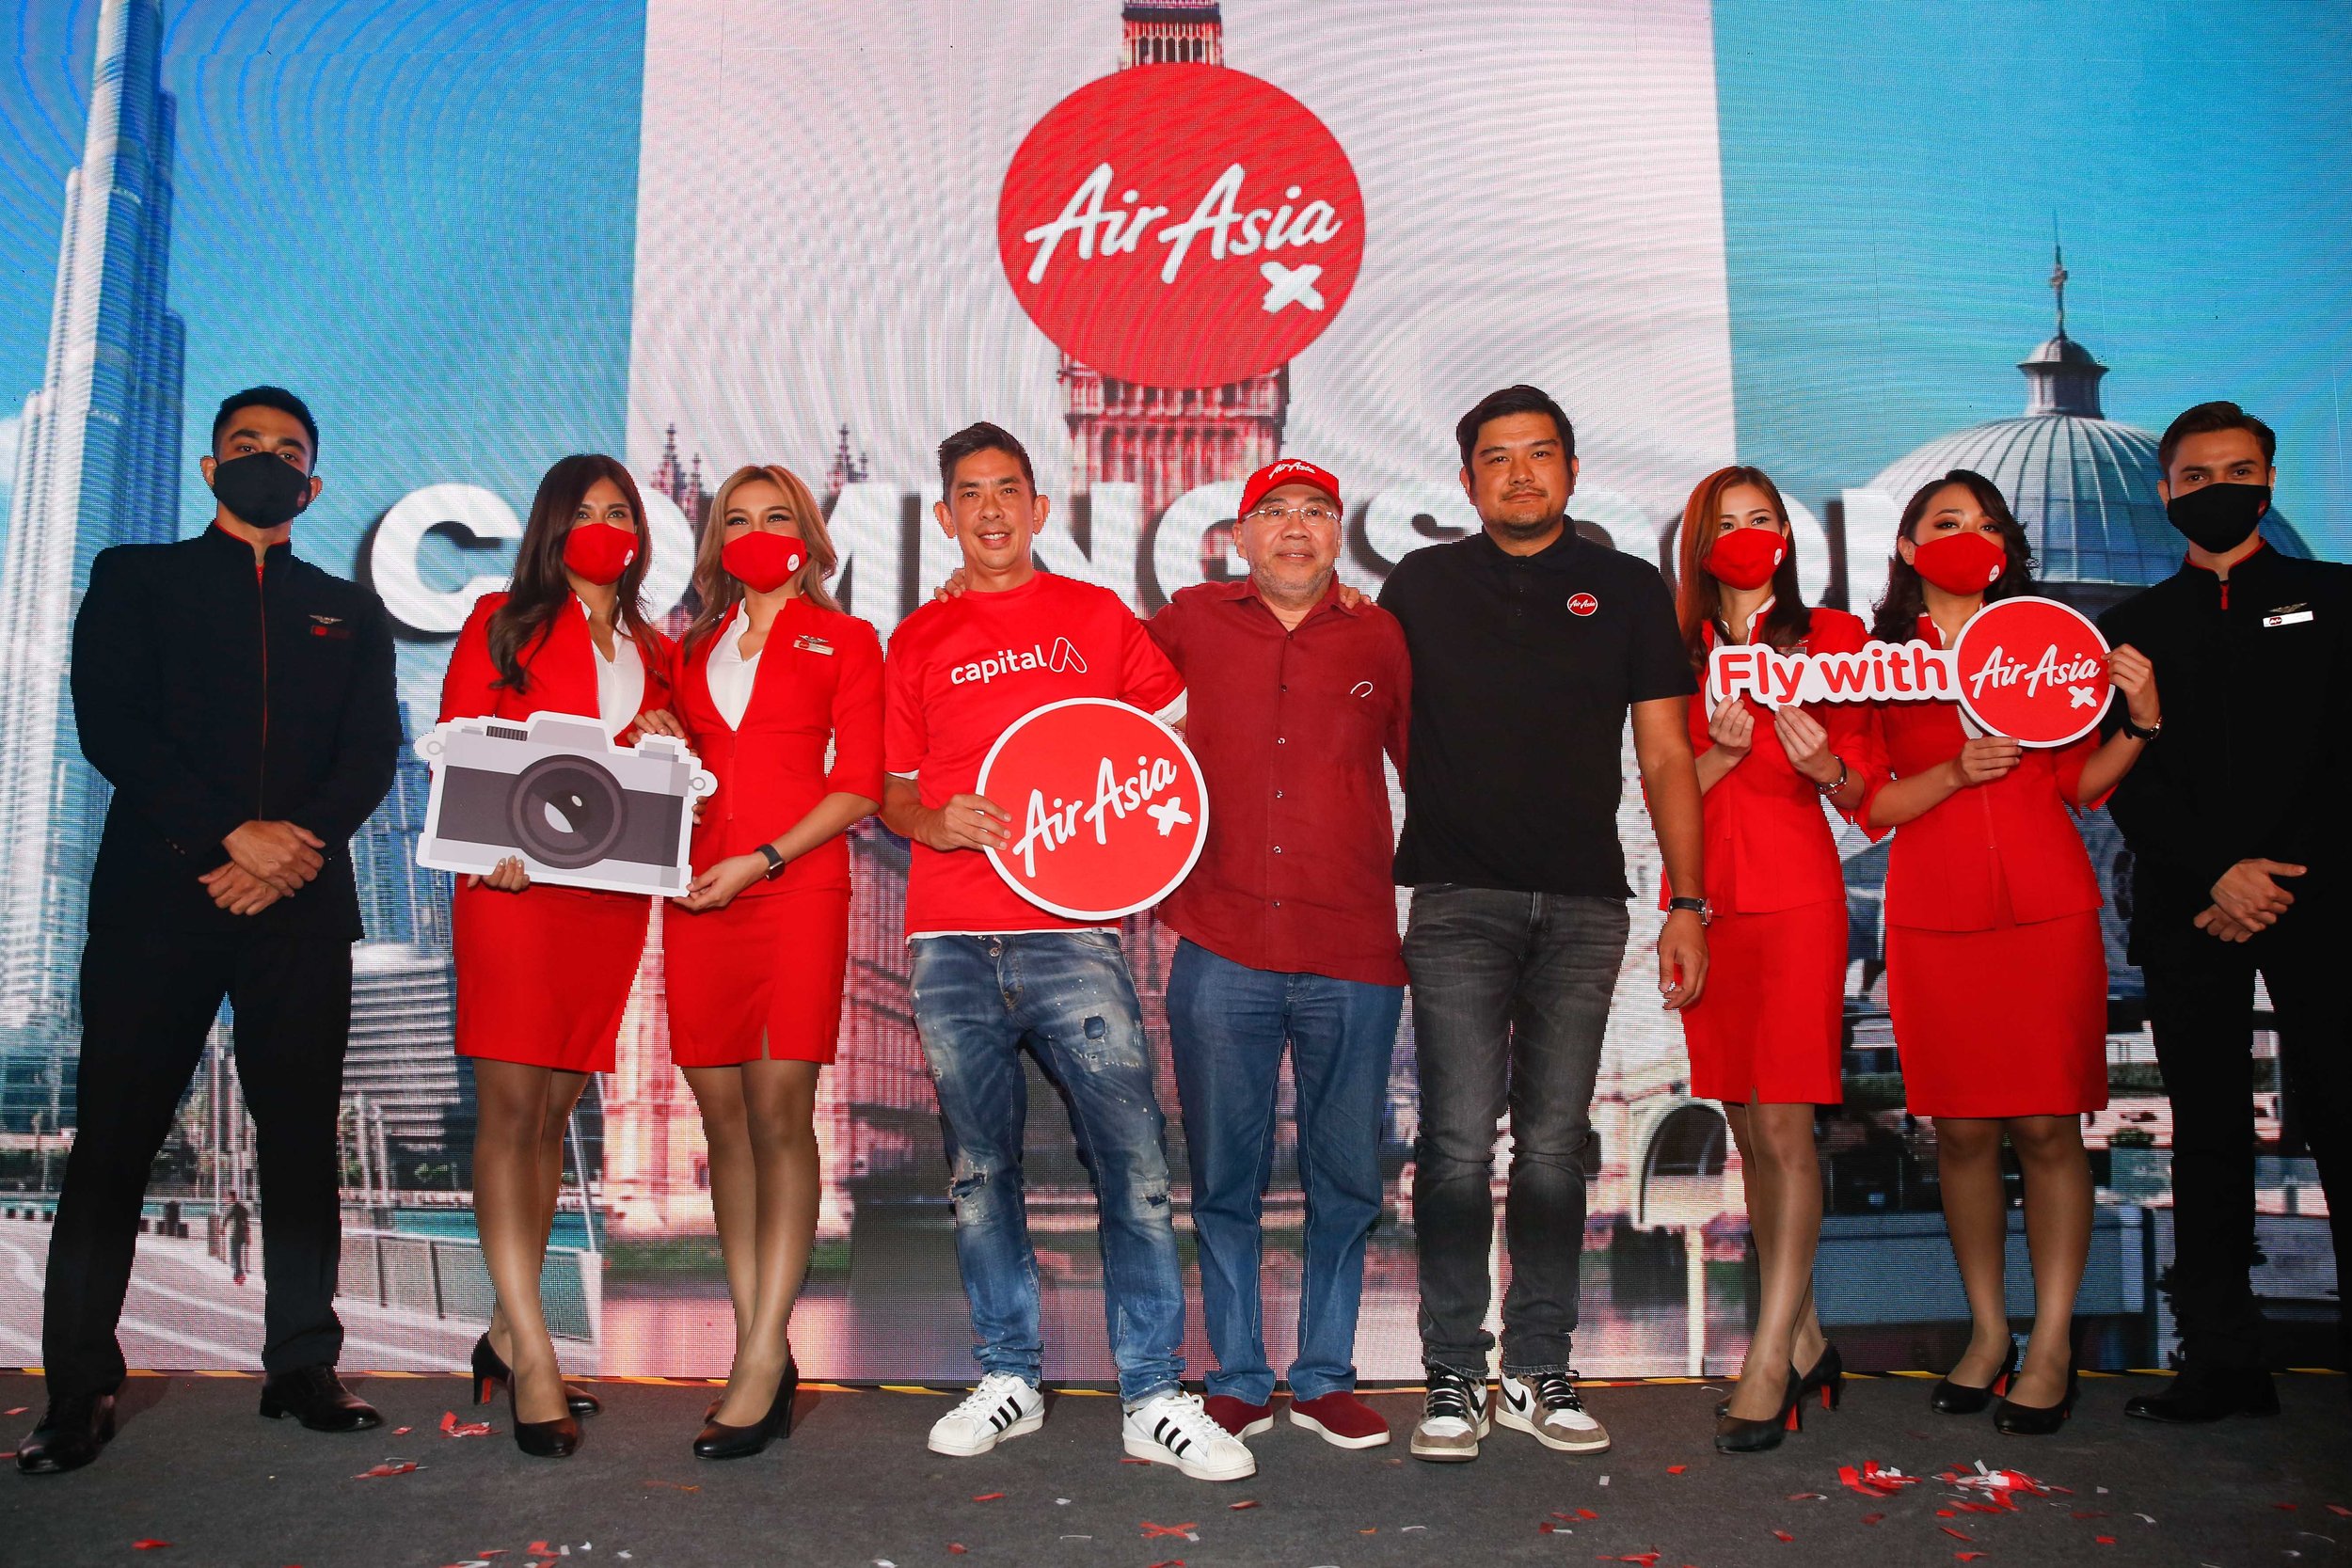  Photo Caption: (Fourth from left) Colin Currie, President (Commercial) of Capital A; Datuk Kamarudin Meranun, Executive Chairman of Capital A; and Benyamin Ismail, CEO of AirAsia X at the AirAsia X relaunched event held in Kuala Lumpur today. 